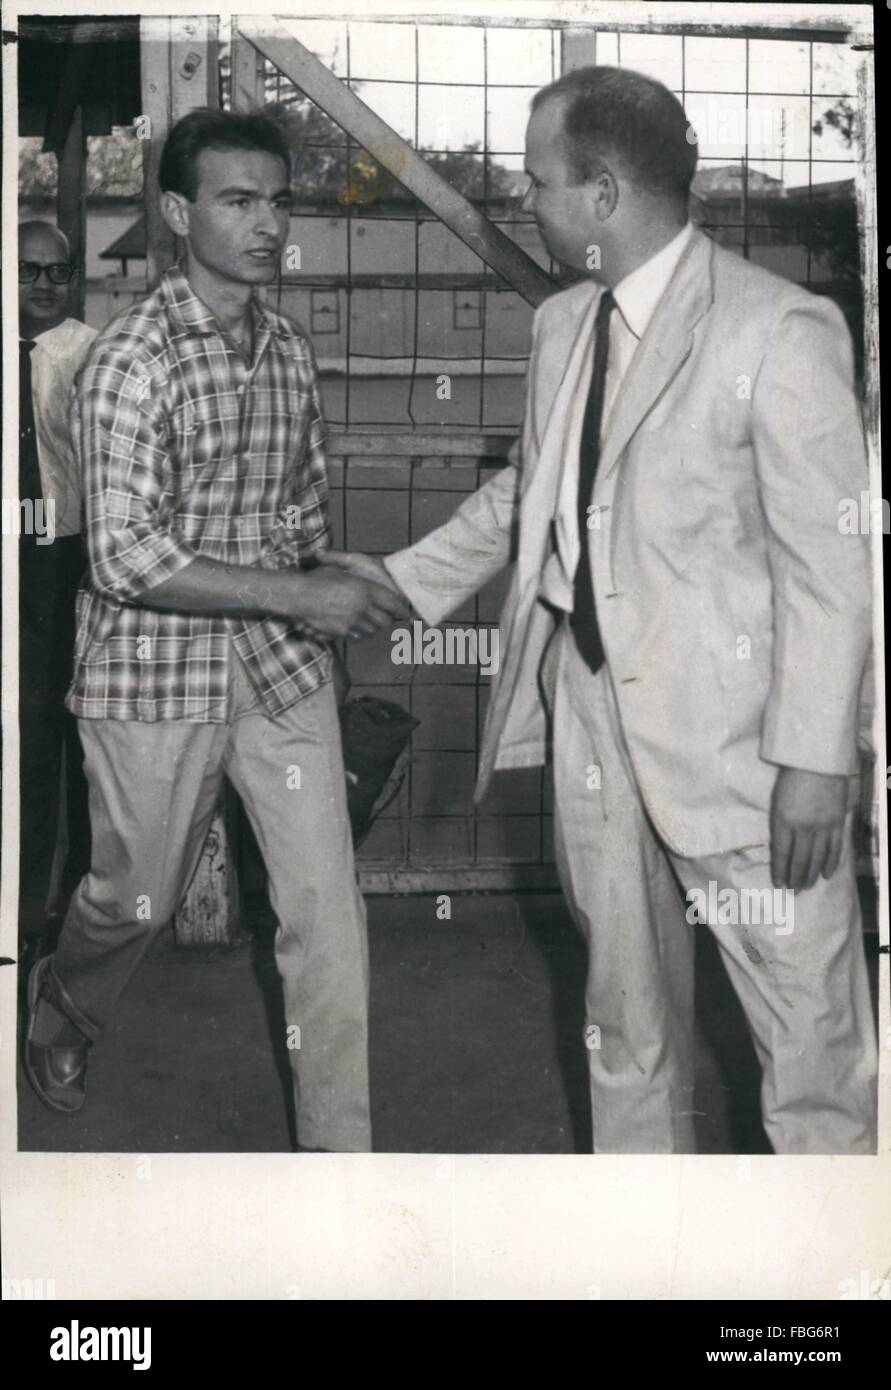 1967 - Vladislov Stephanovich Tarasov (left), a Russian sailor who had approached the U.S. Consulate - General in Calcutta for political asylum, on his release from the Presidency Jail, Alipore, Calcutta, is being received by Mr. Hugh G. Haight, the U.S. Vice-Cosul, on Saturday afternoon - Statesman, Calcutta, India. © Keystone Pictures USA/ZUMAPRESS.com/Alamy Live News Stock Photo